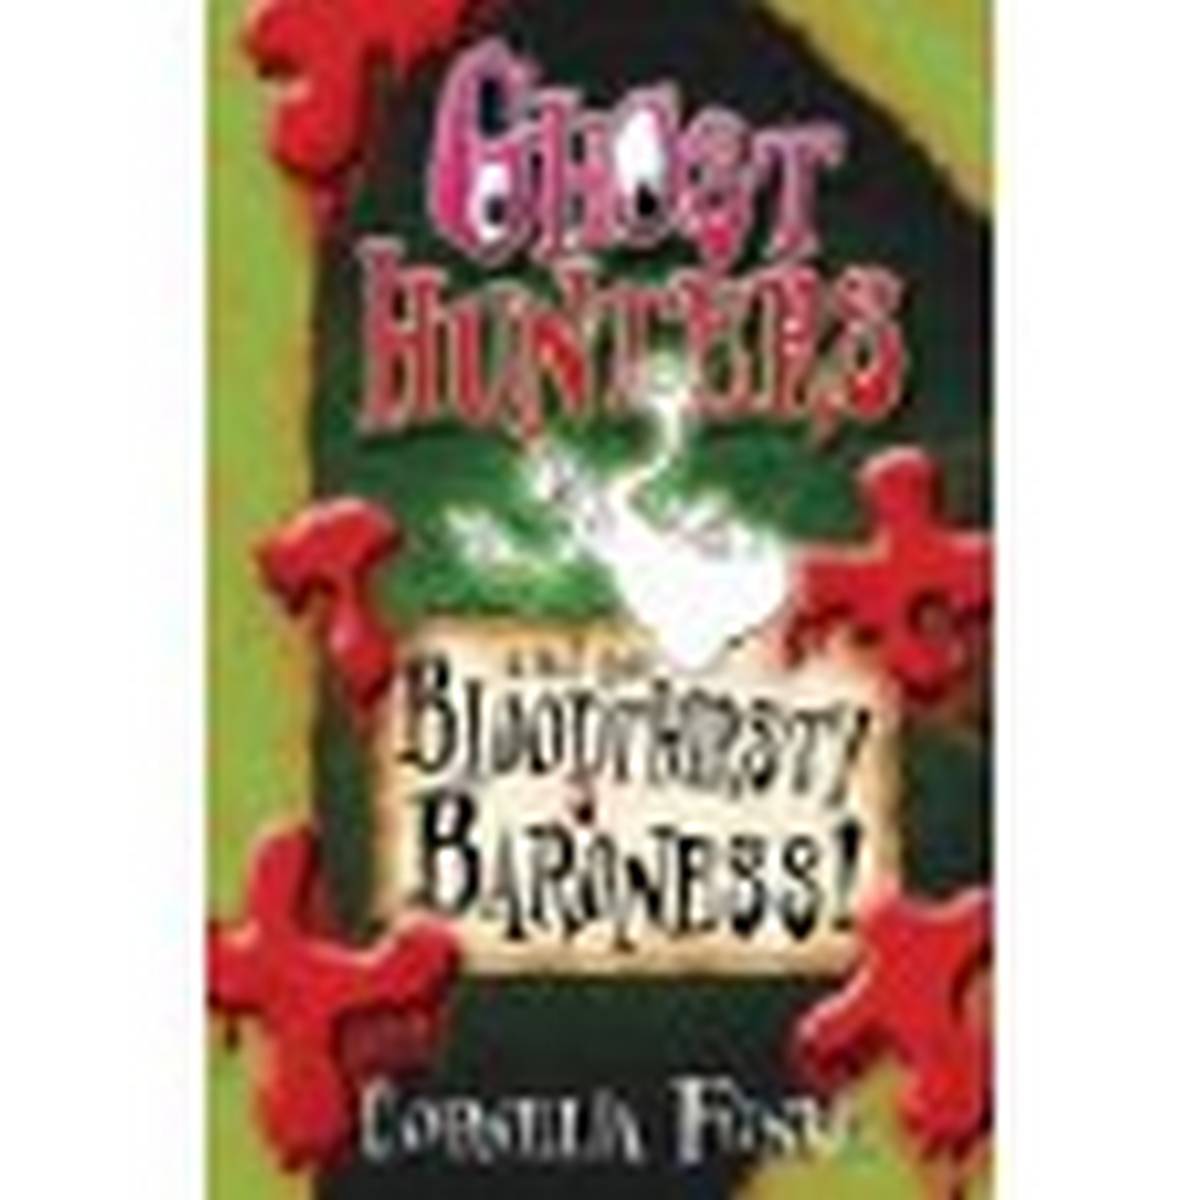 Ghosthunters and the Bloodthirsty Baroness! (Ghosthunters)